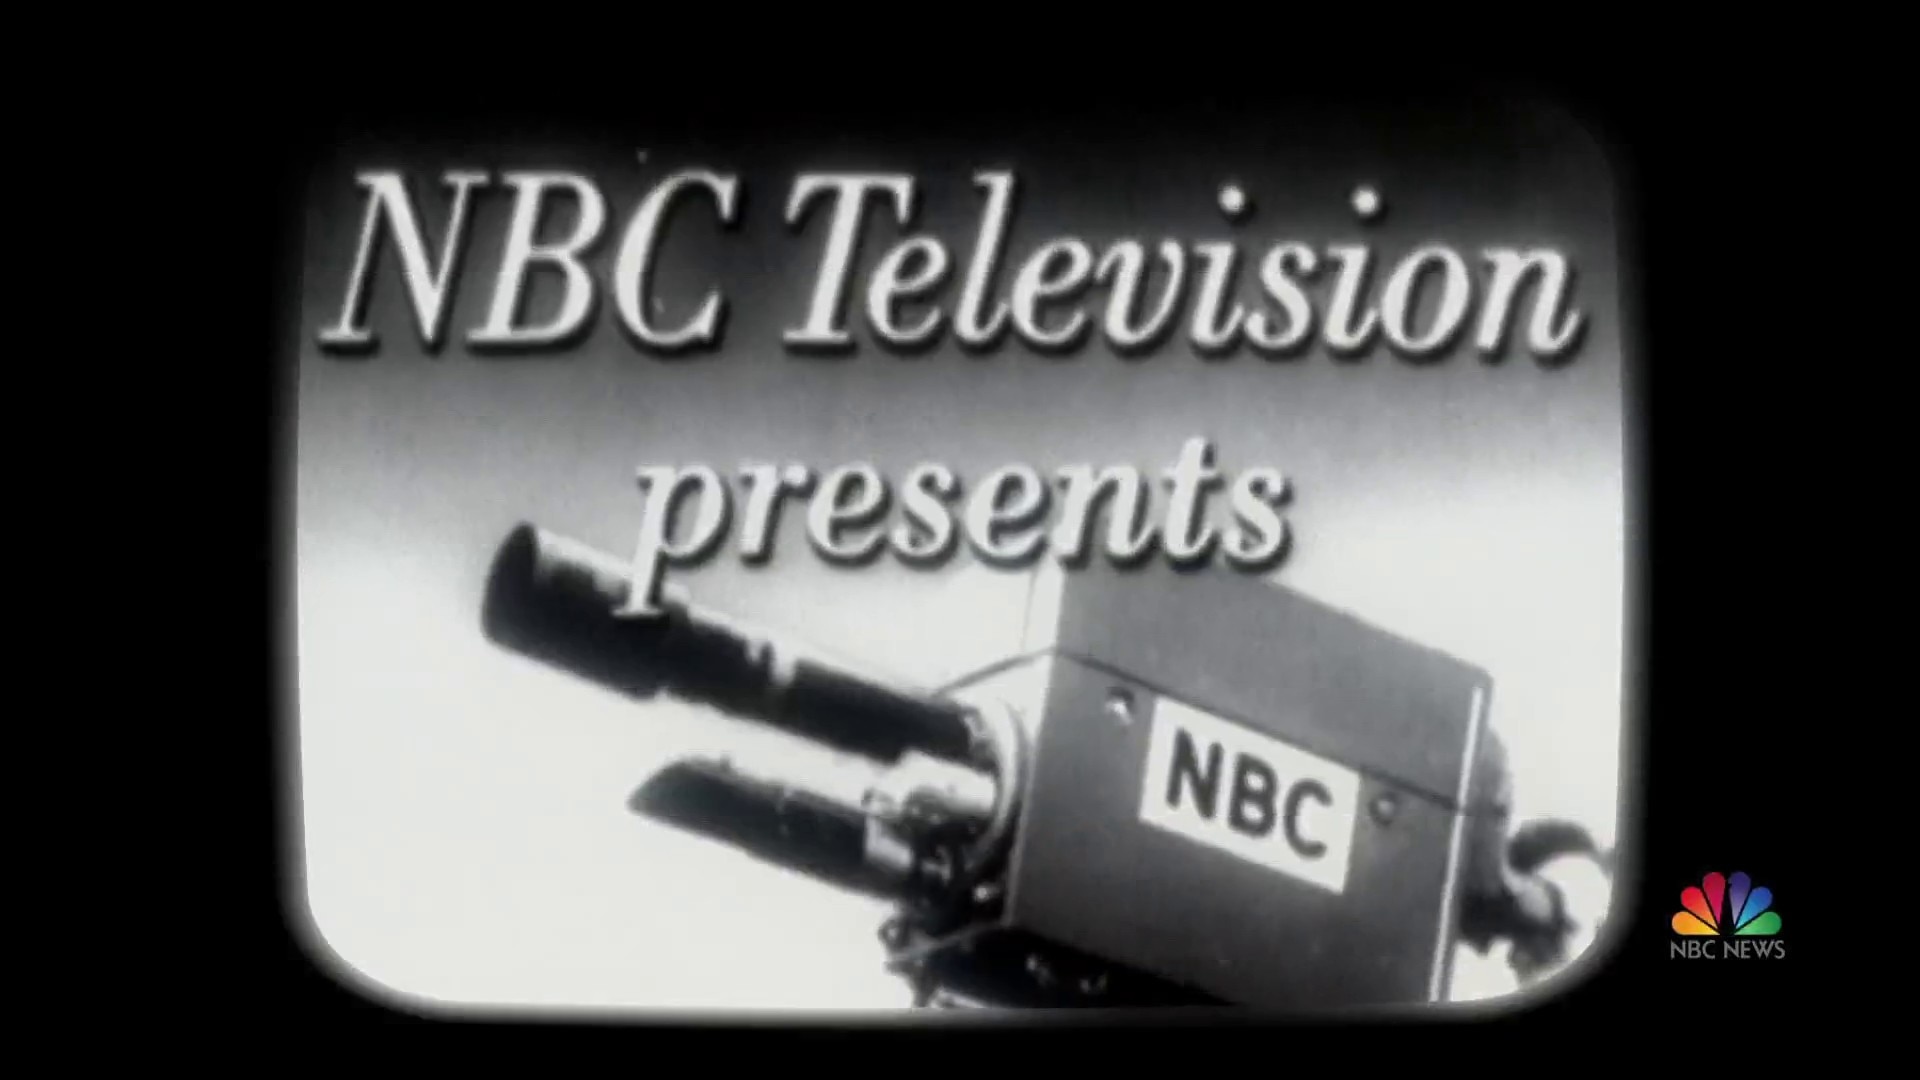 Watch Nbc Nightly News With Lester Holt Excerpt Nbc Nightly News Turns 75 Celebrating Our Past